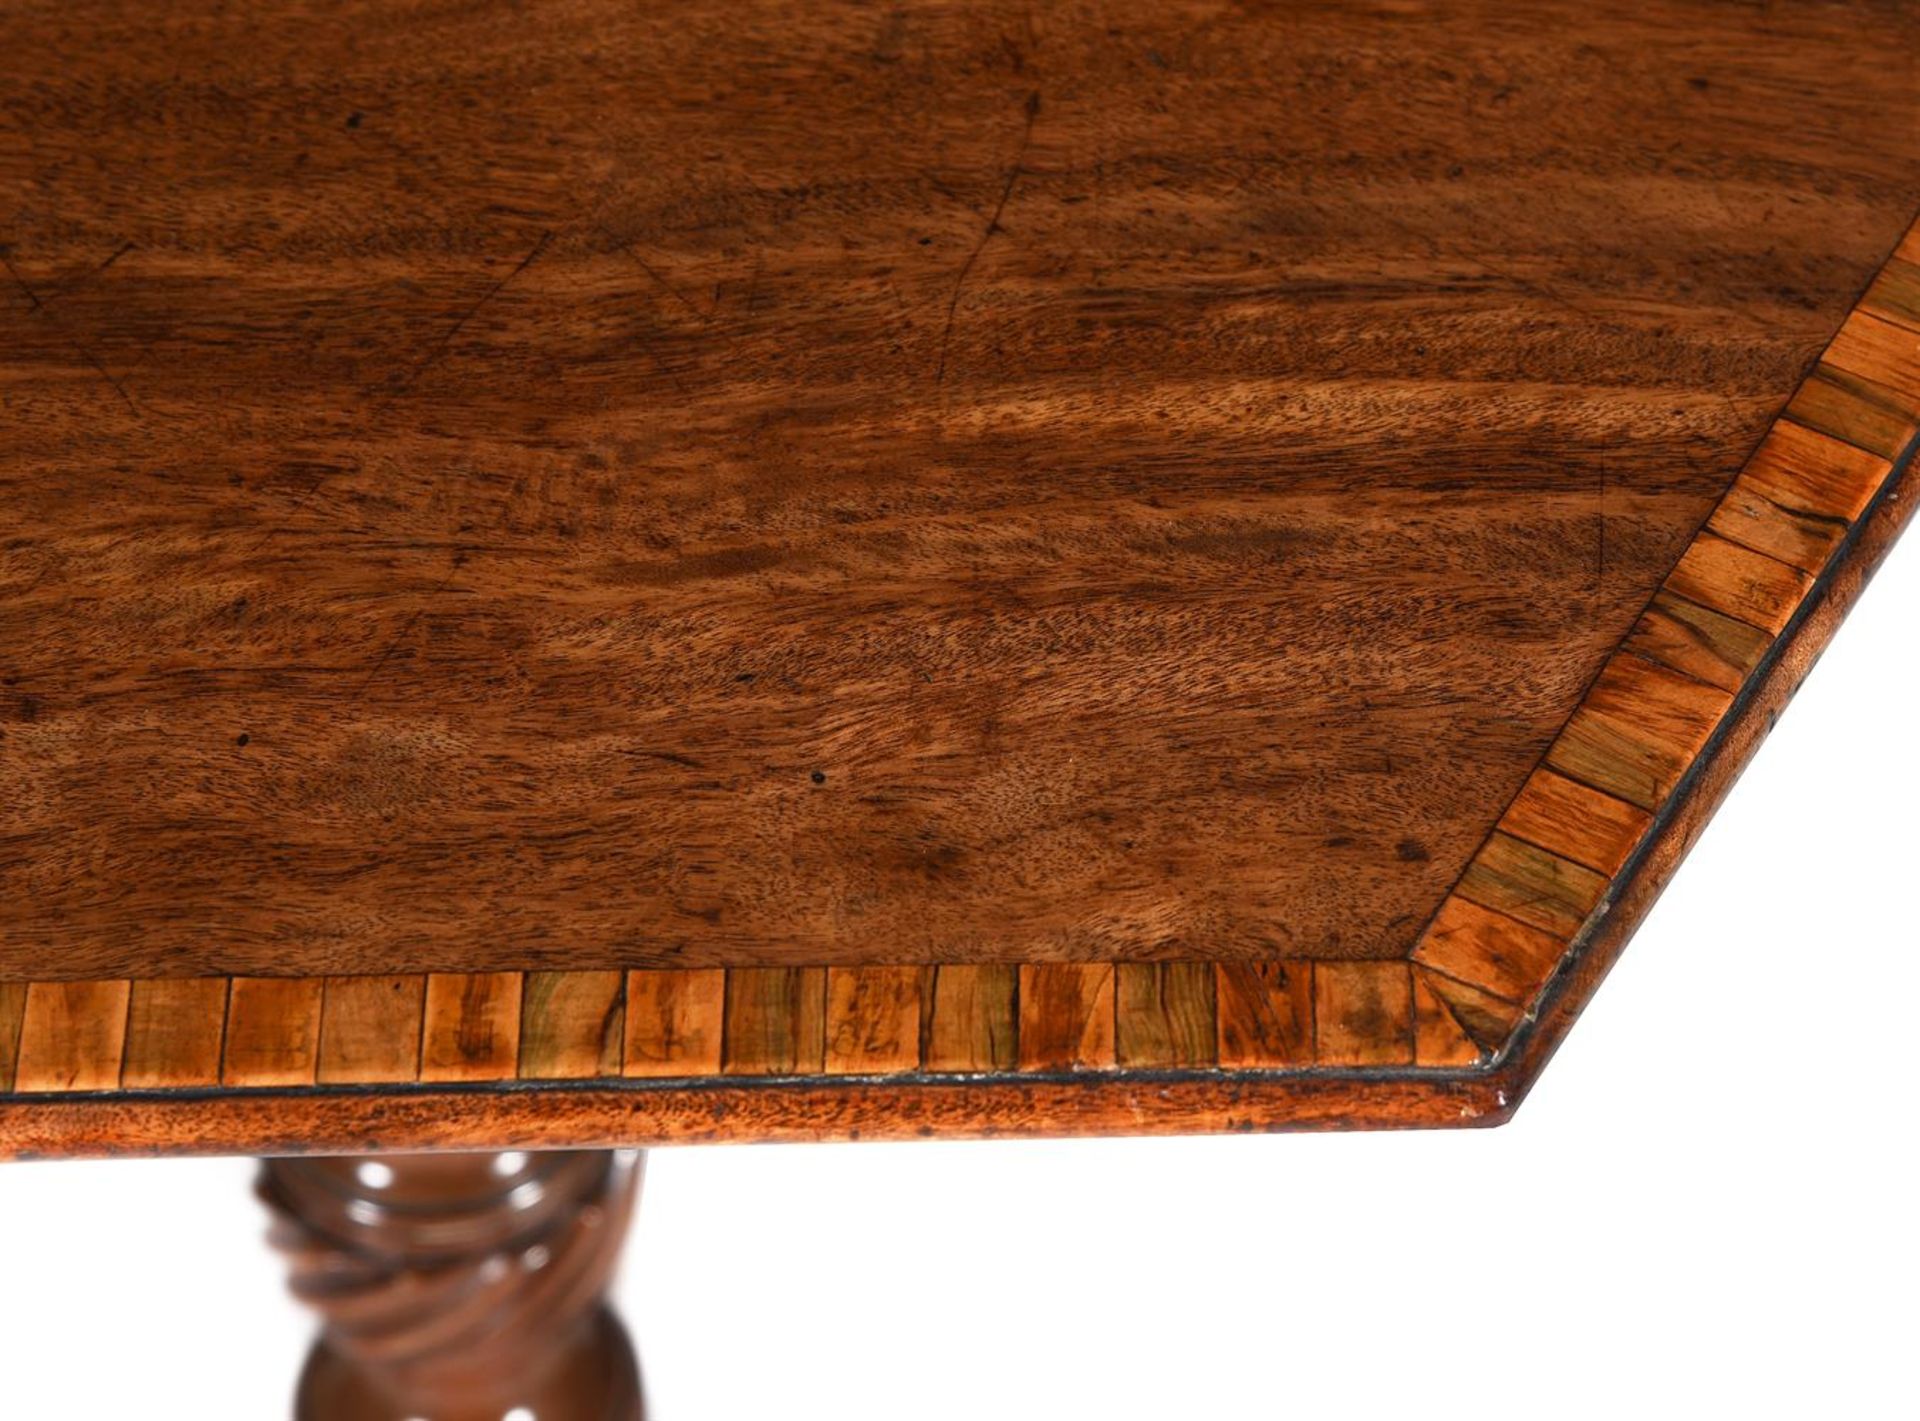 A GEORGE III GUADELOUPE MAHOGANY HEXAGONAL TRIPOD TABLE, POSSIBLY BY THOMAS CHIPPENDALE, CIRCA 1765 - Image 3 of 4